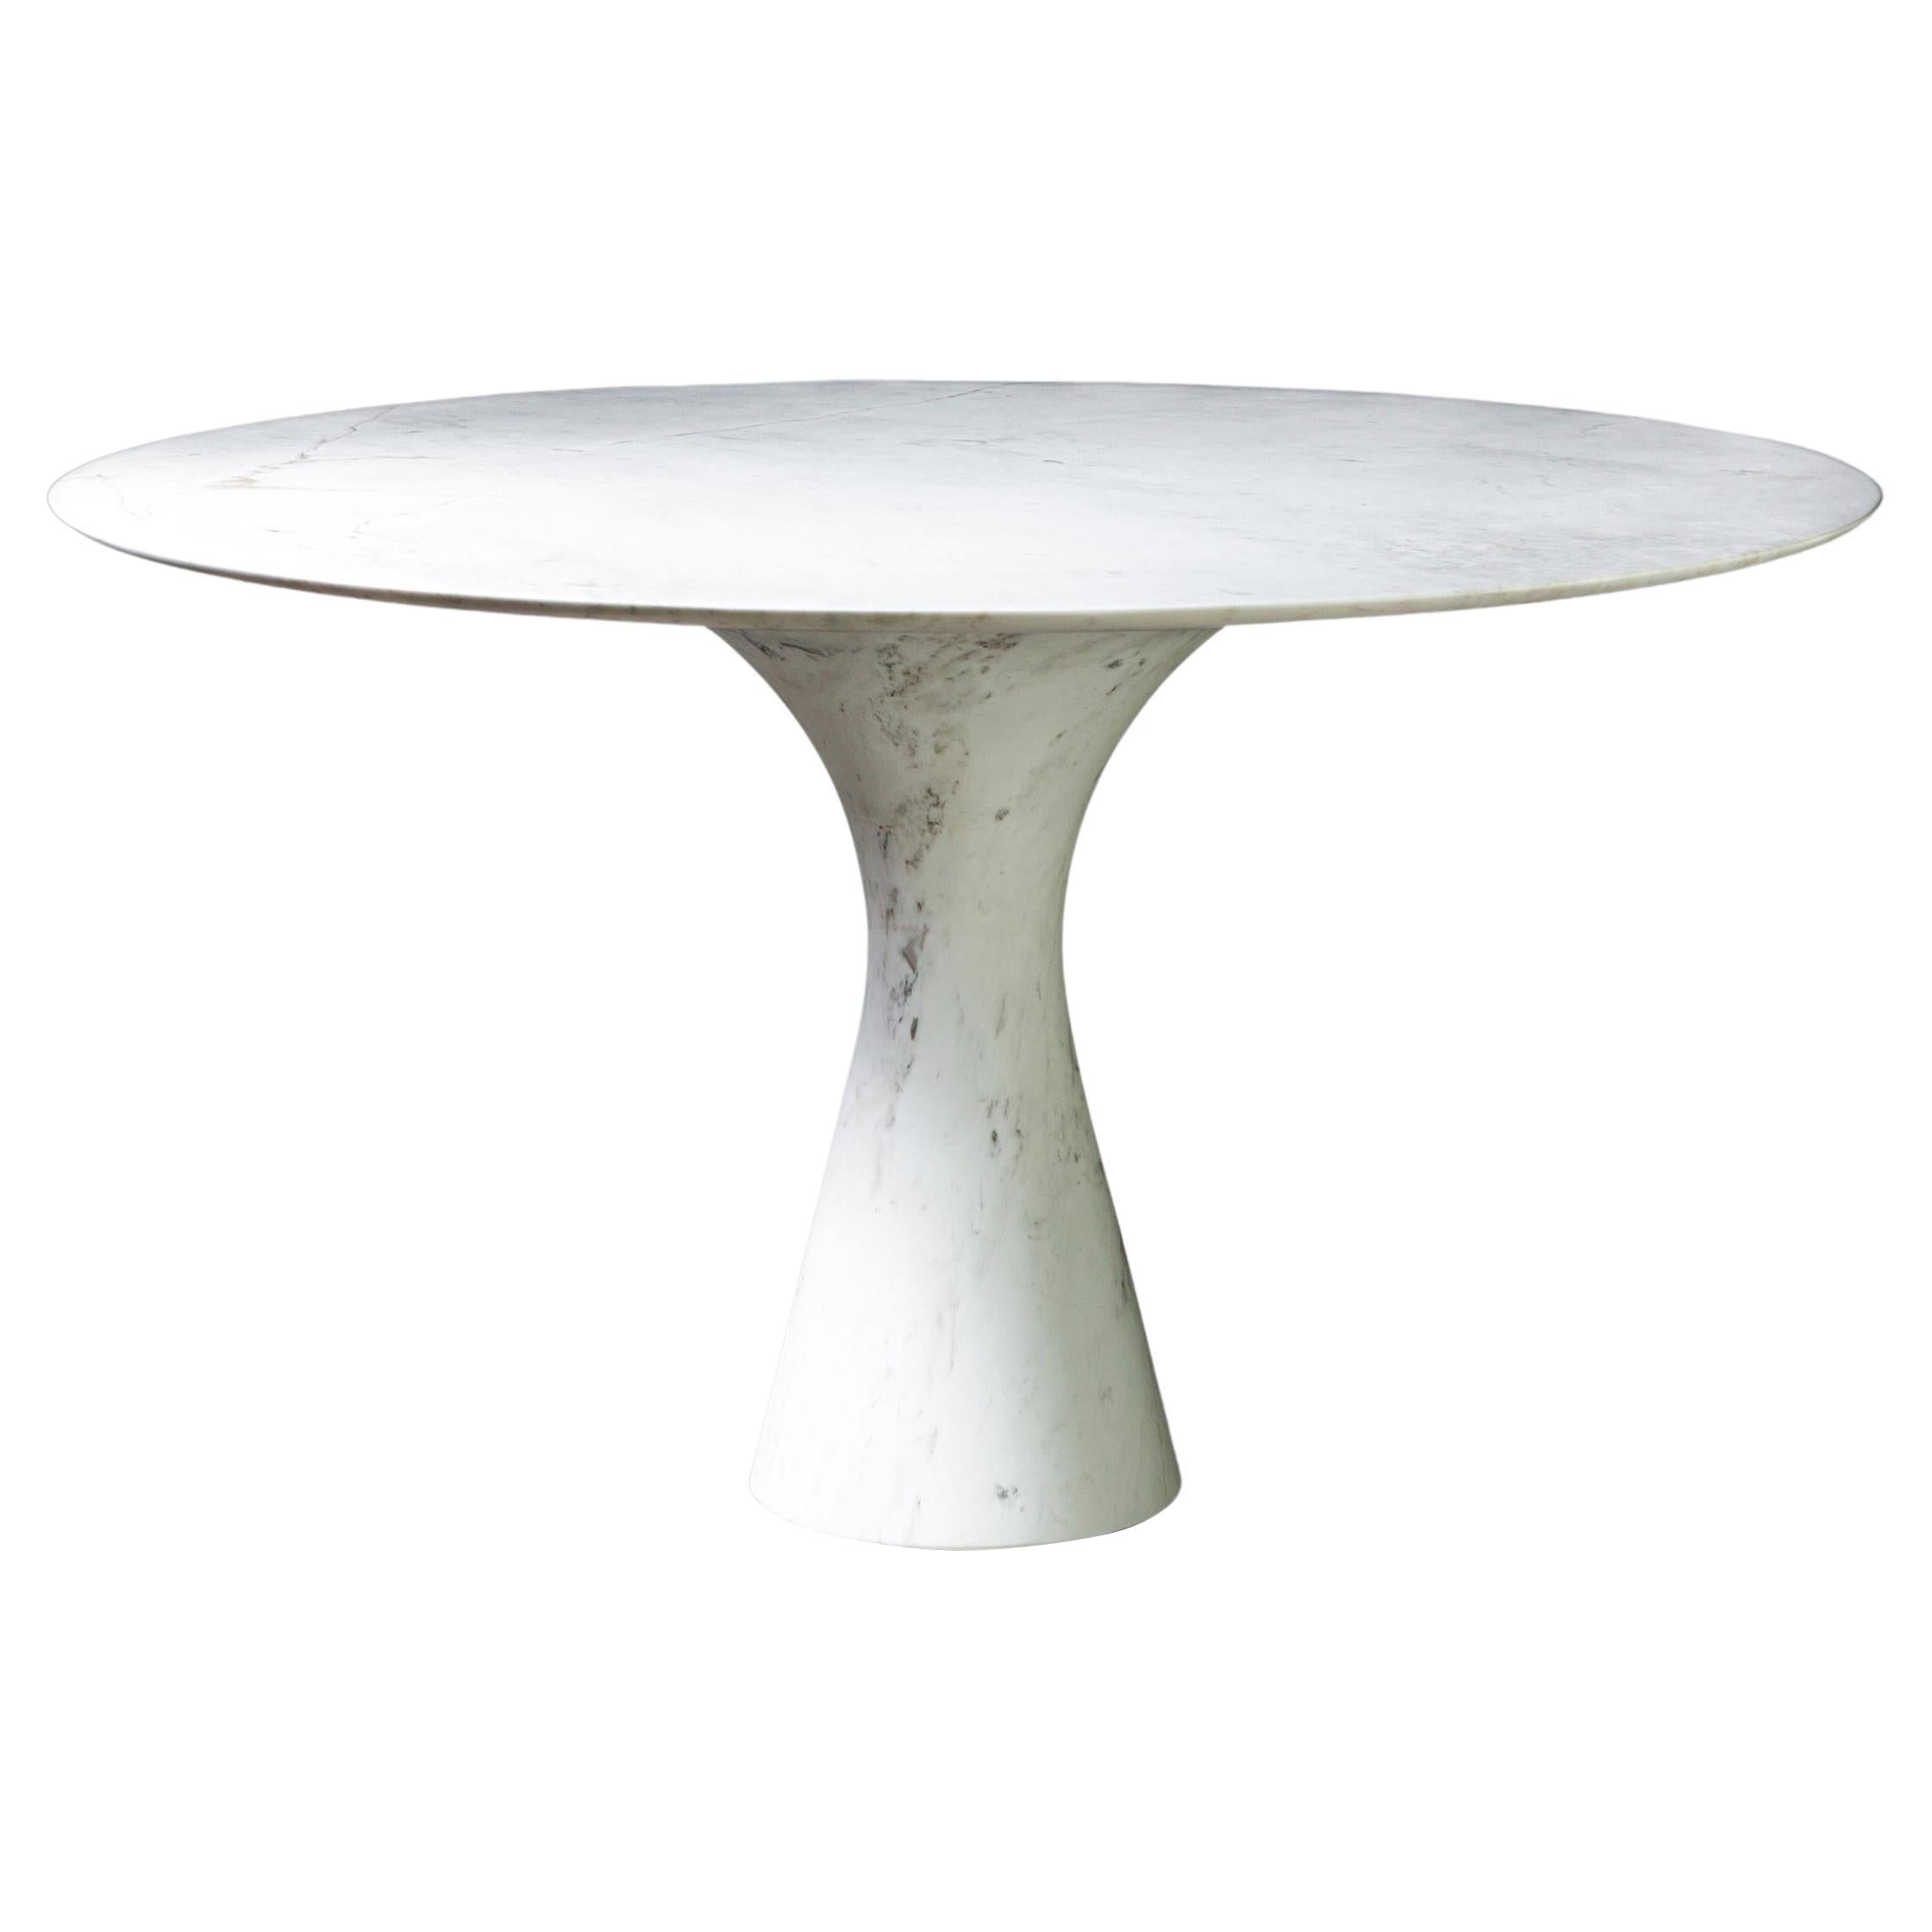 Kynos Refined Contemporary Marble Dining Table 130/75